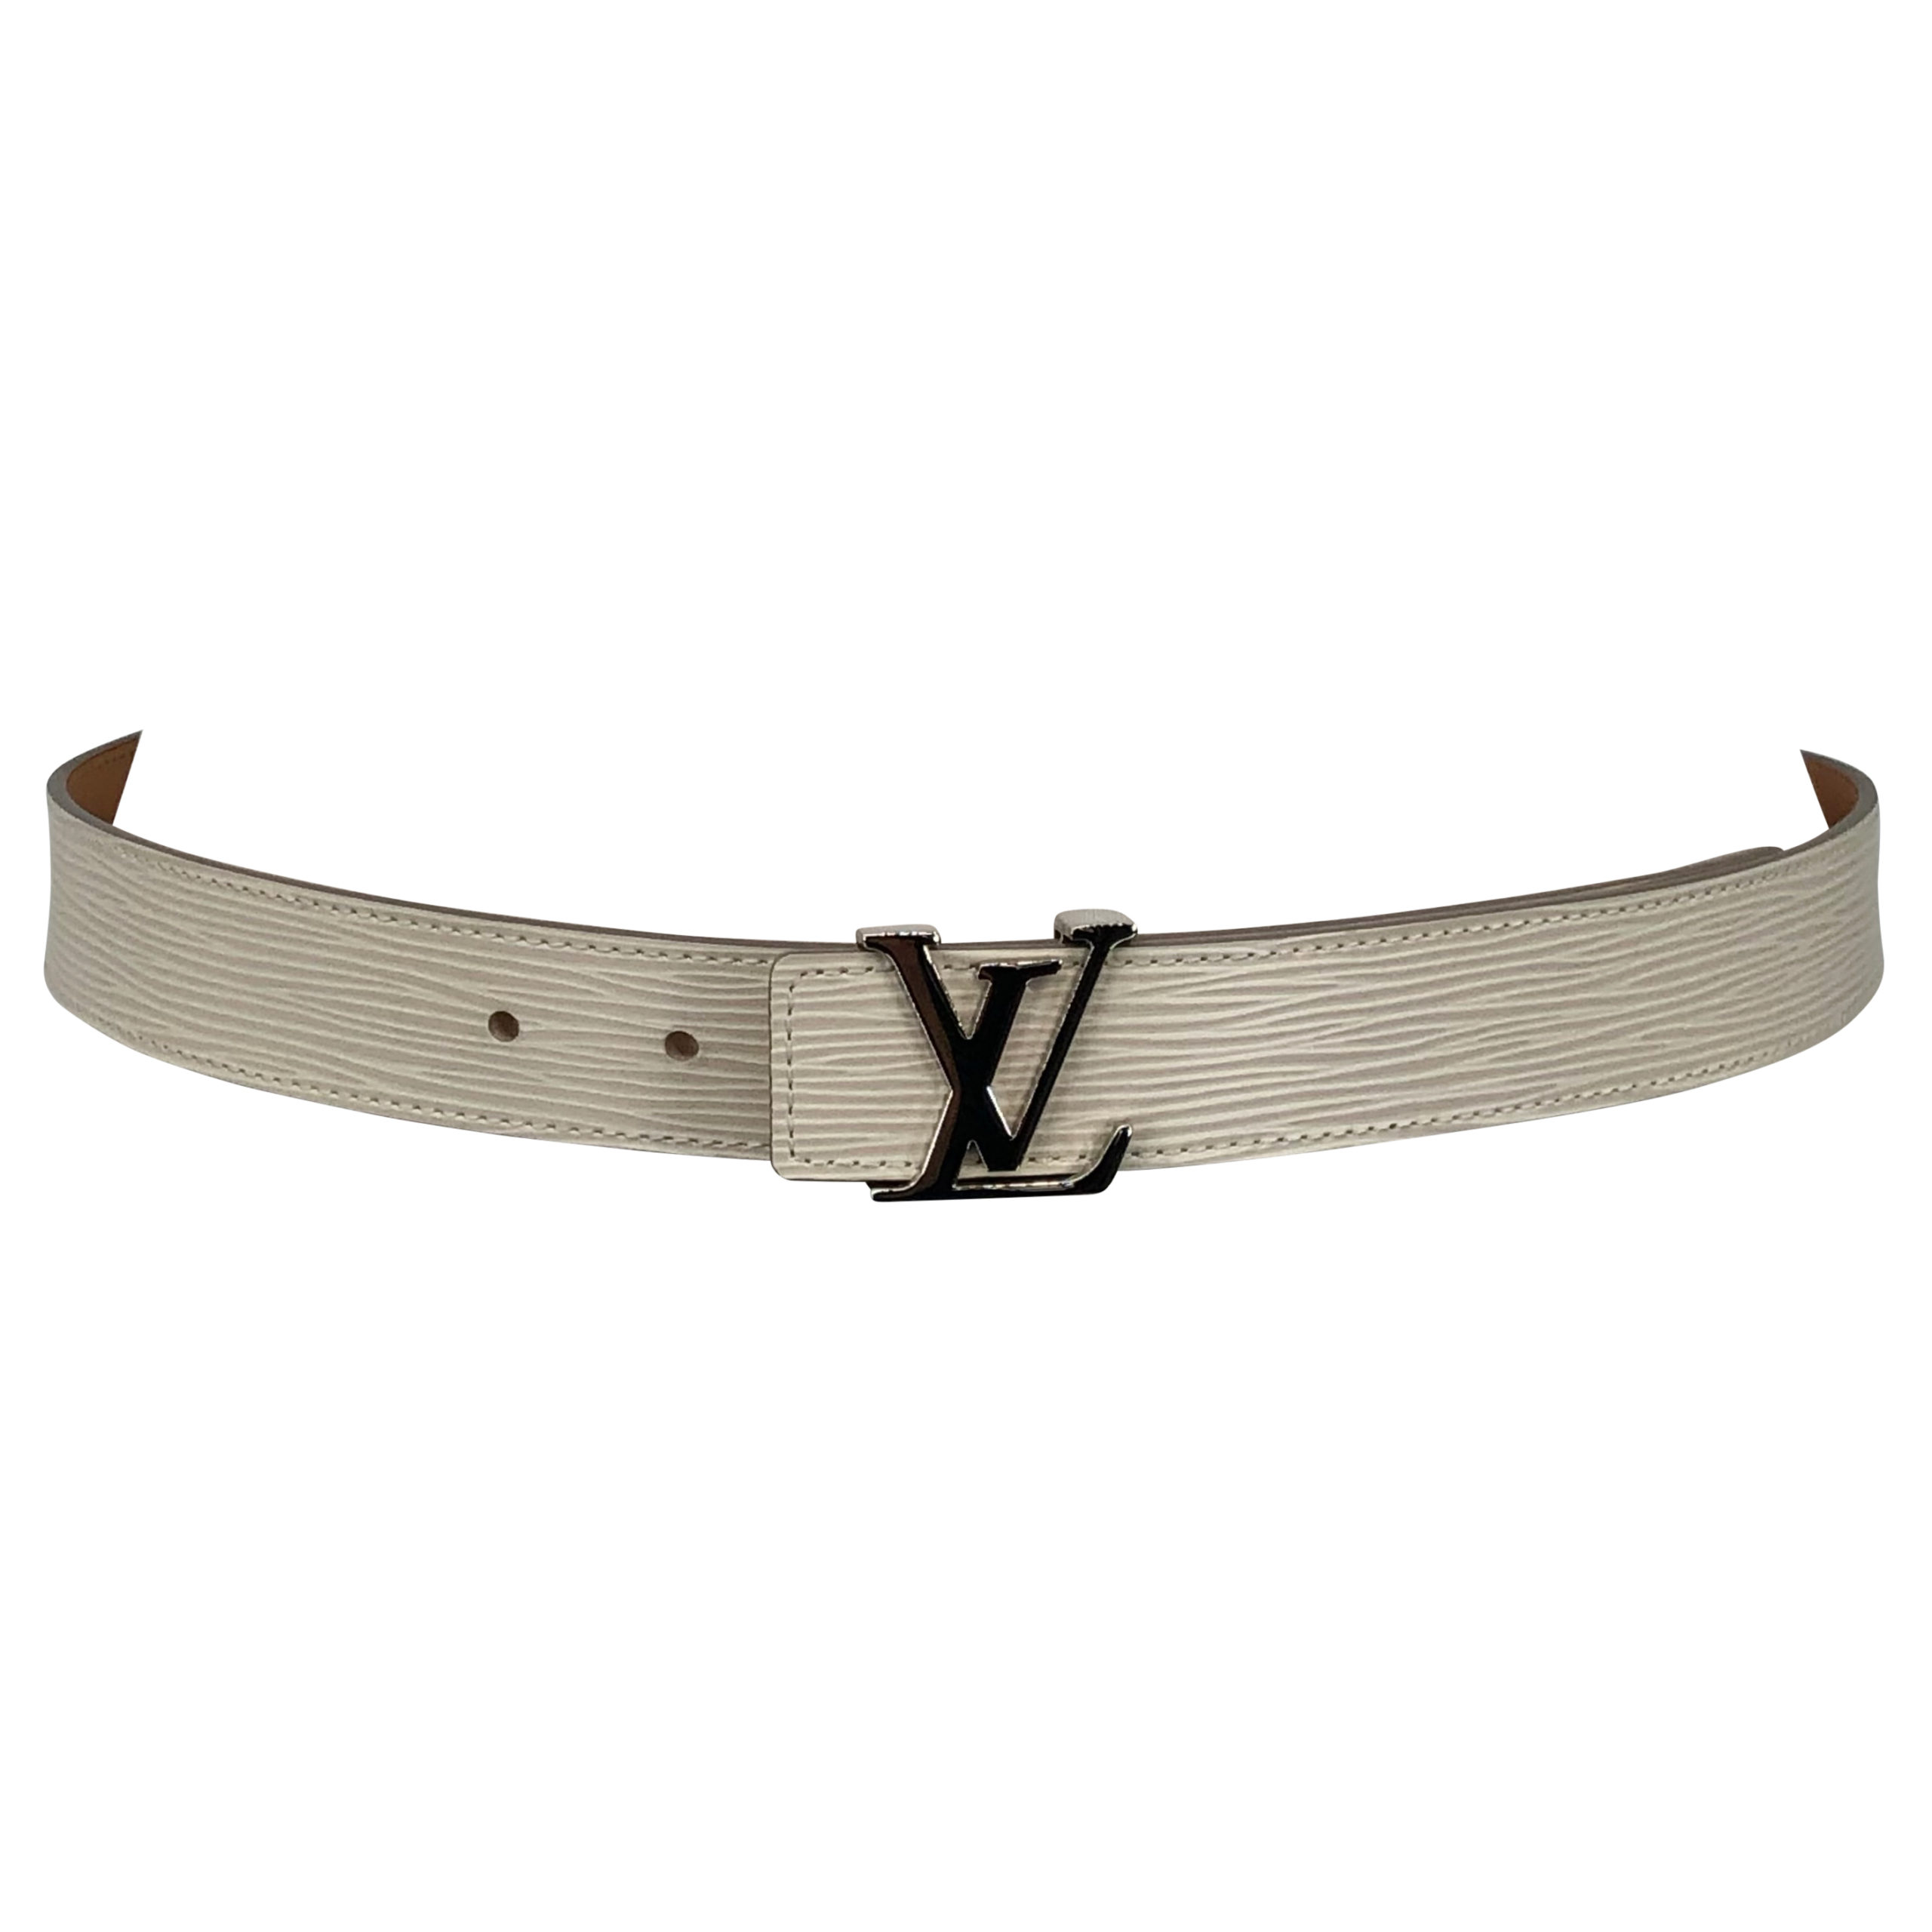 Leather belt Louis Vuitton Silver size 100 cm in Leather - 31941222